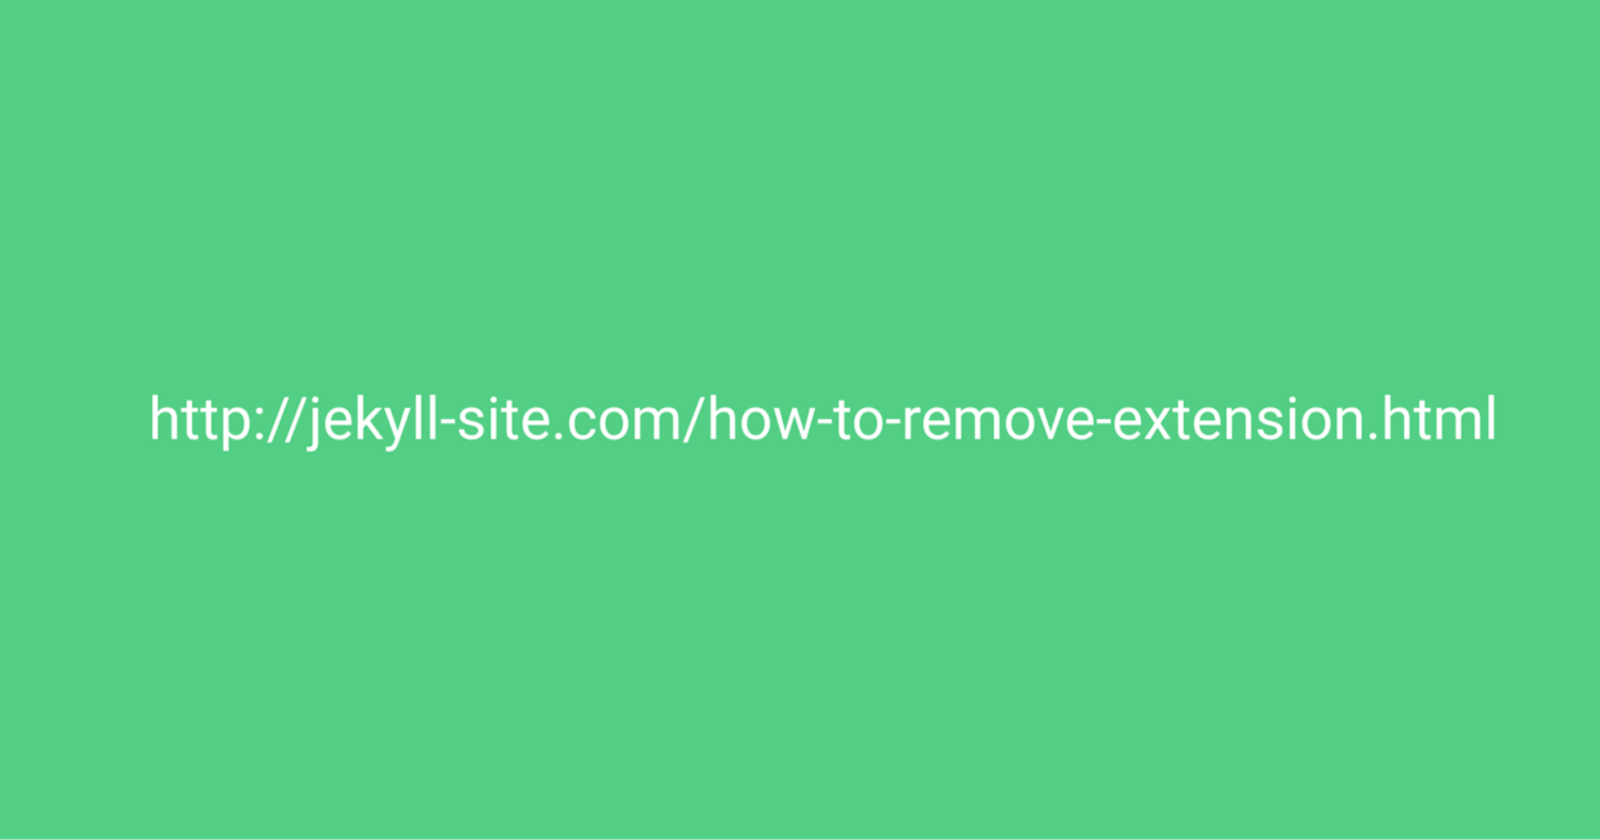 How to remove .html extension in Jekyll